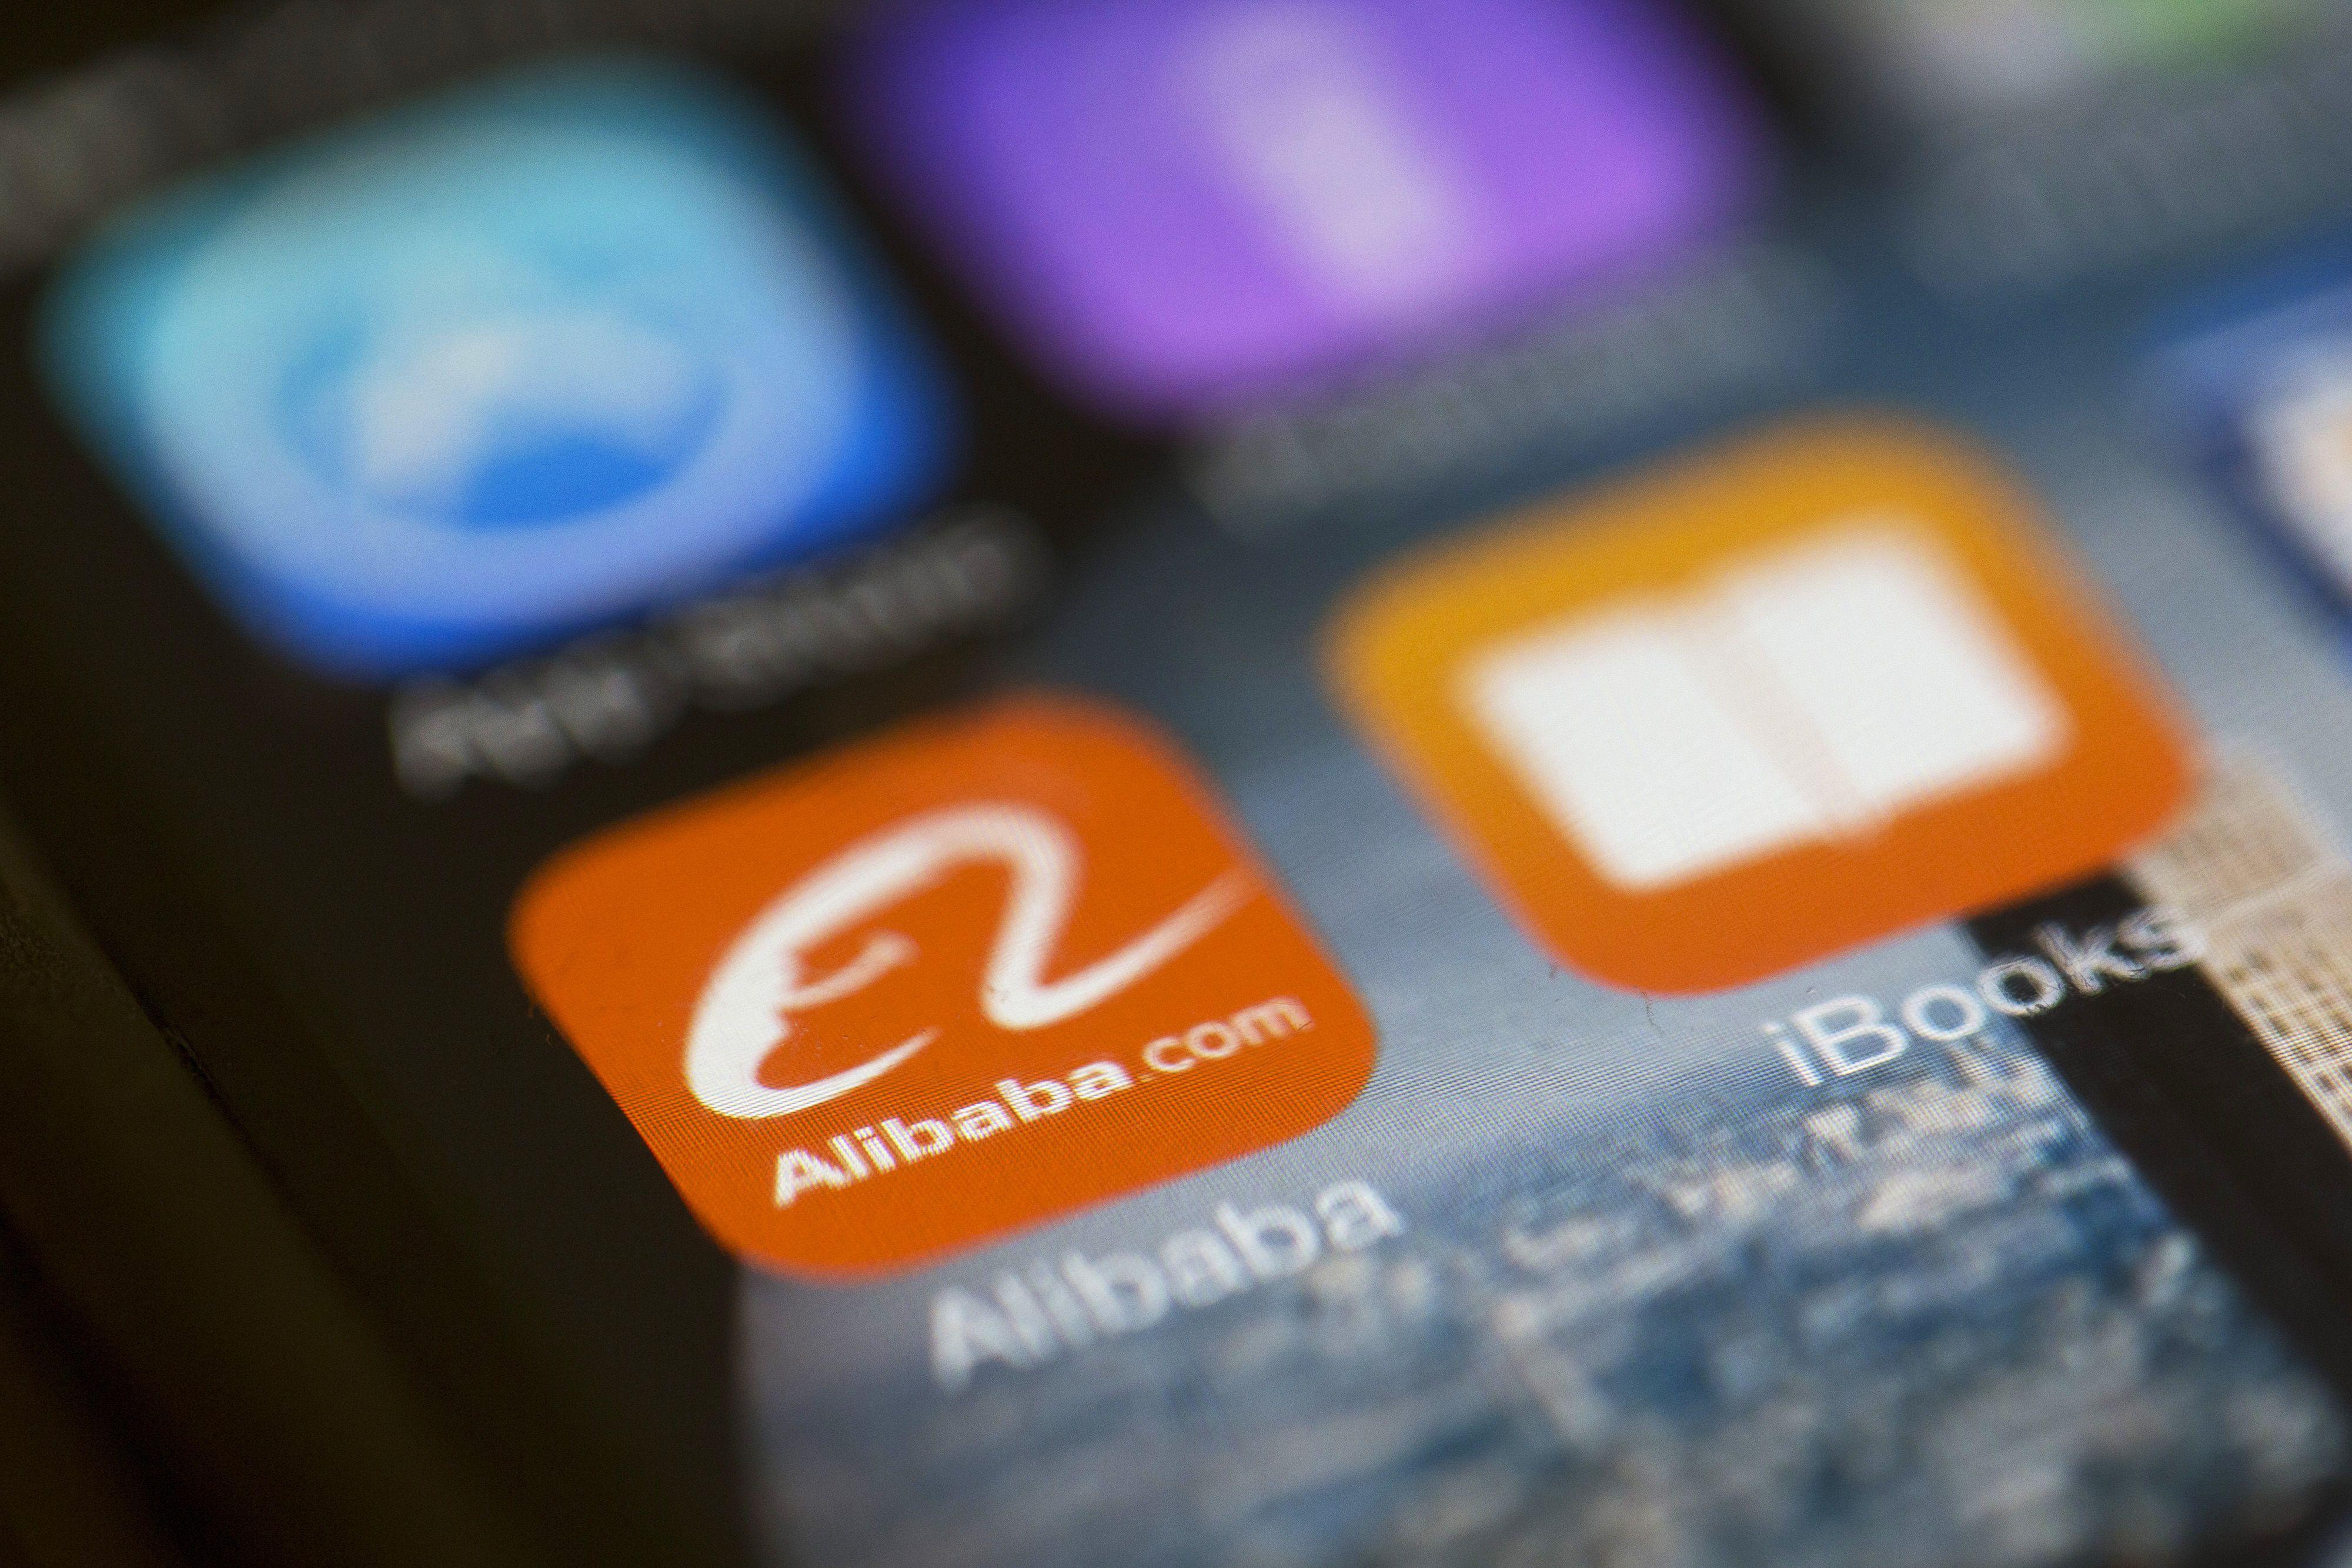 2014 Apple Company Logo - Alibaba Takes On Fake Reviews In Latest Push For Credibility | Fortune